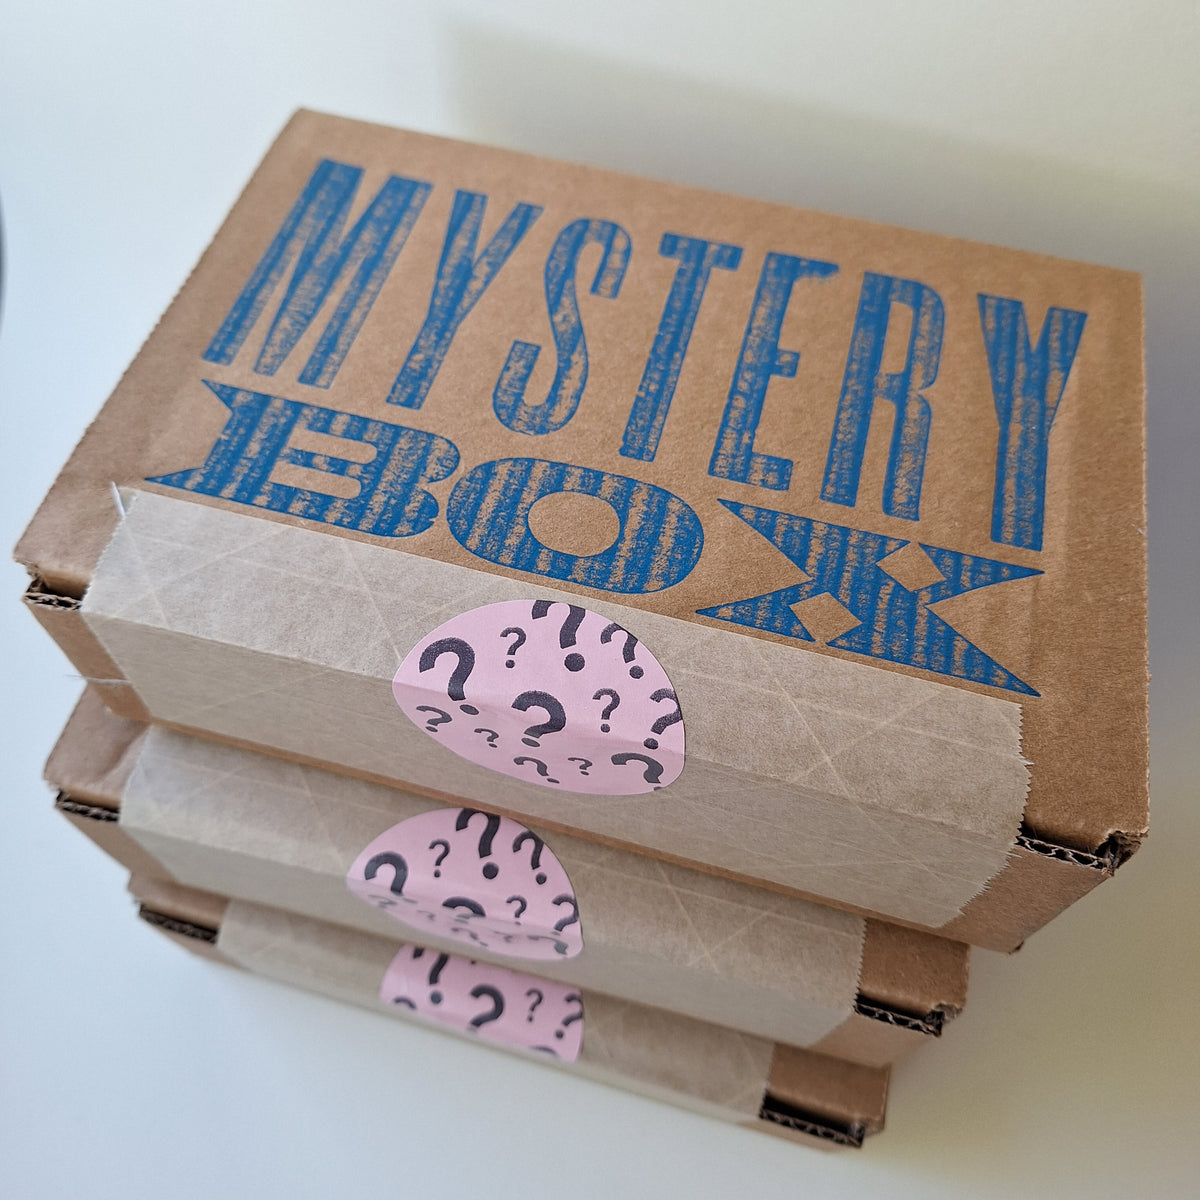 How to buy an  mystery box - Cantech Letter